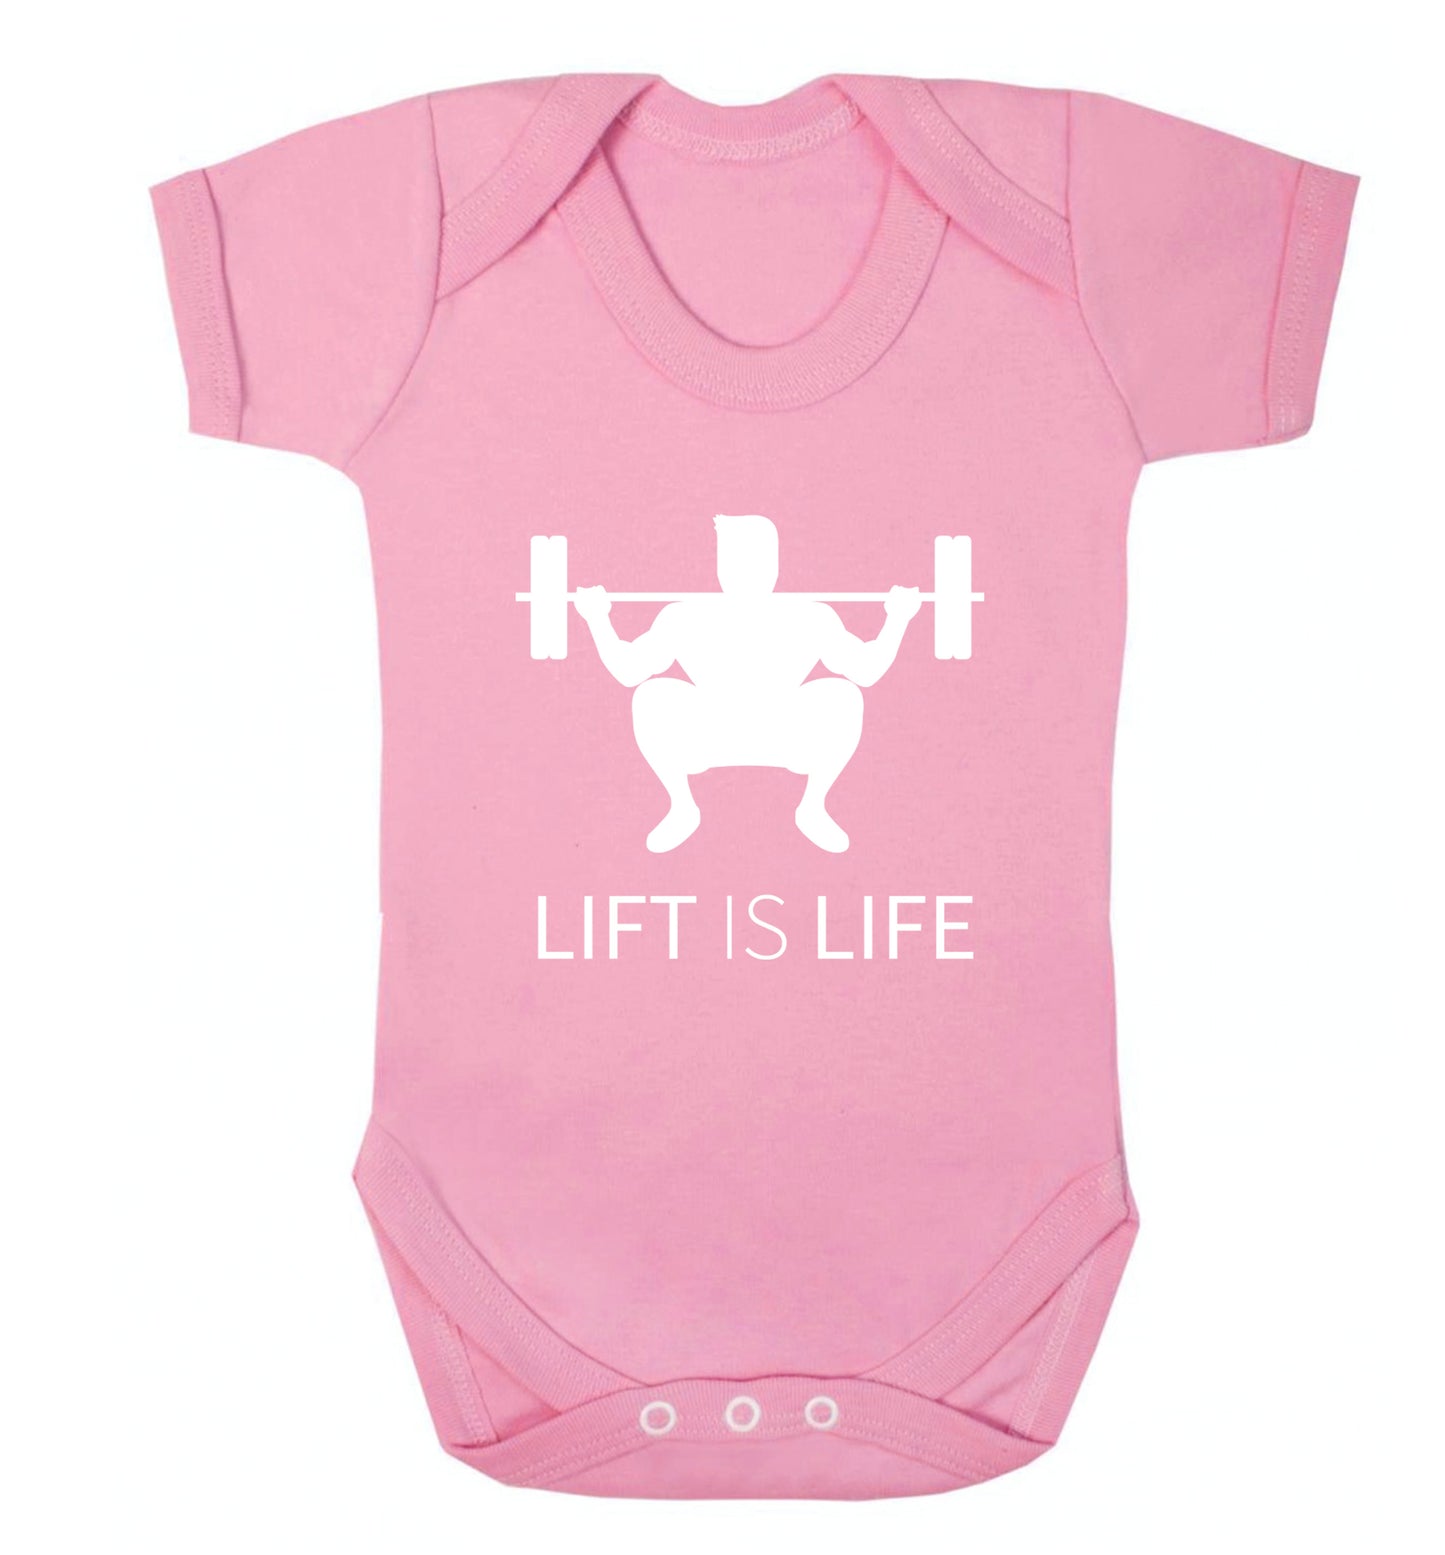 Lift is life Baby Vest pale pink 18-24 months